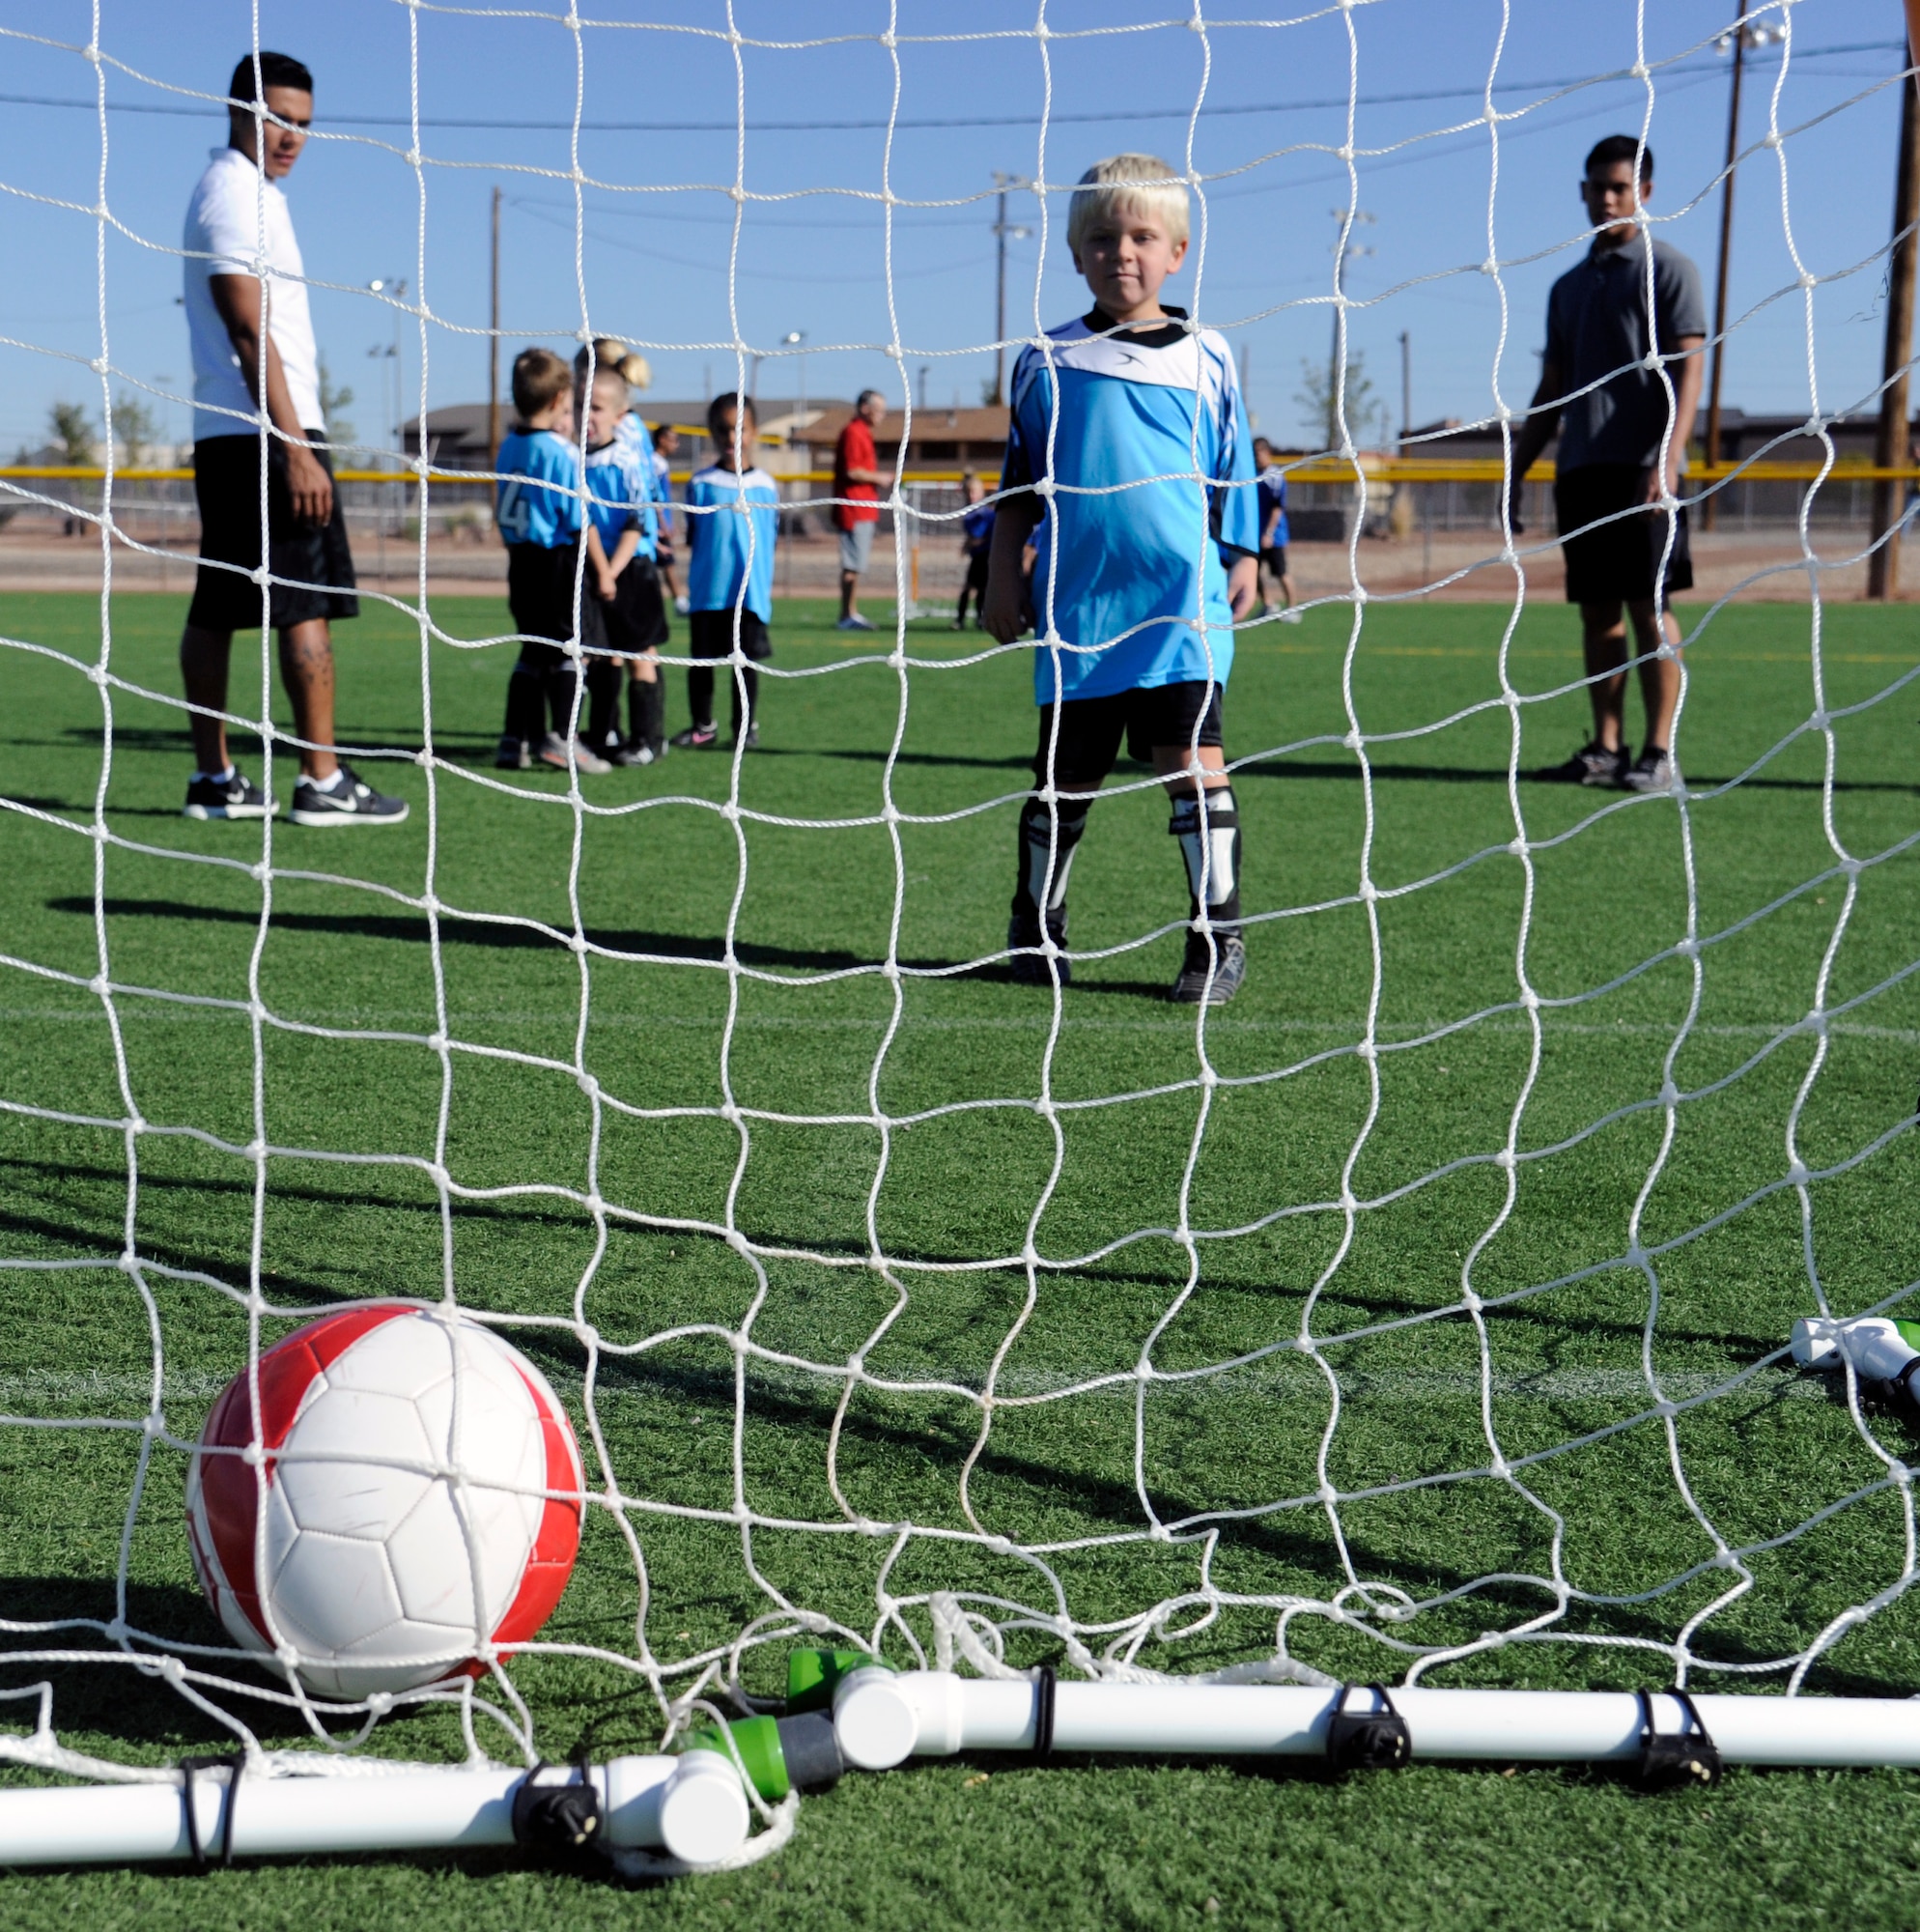 HOLLOMAN AIR FORCE BASE, N.M. -- T.J. Bengston, son of U.S. Air Force Tech. Sgt.  Christian Bengston, watches a ball go in a goal Oct. 22, 2011, during a pre-game warm-up at Johnson Field. Soccer, like all of the sports offered in Holloman’s Youth Sports Program, follows the philosophy of providing a safe, positive and fun learning experience for all of the participants. (U.S. Air Force photo by Airman 1st Class Siuta B. Ika/Released)